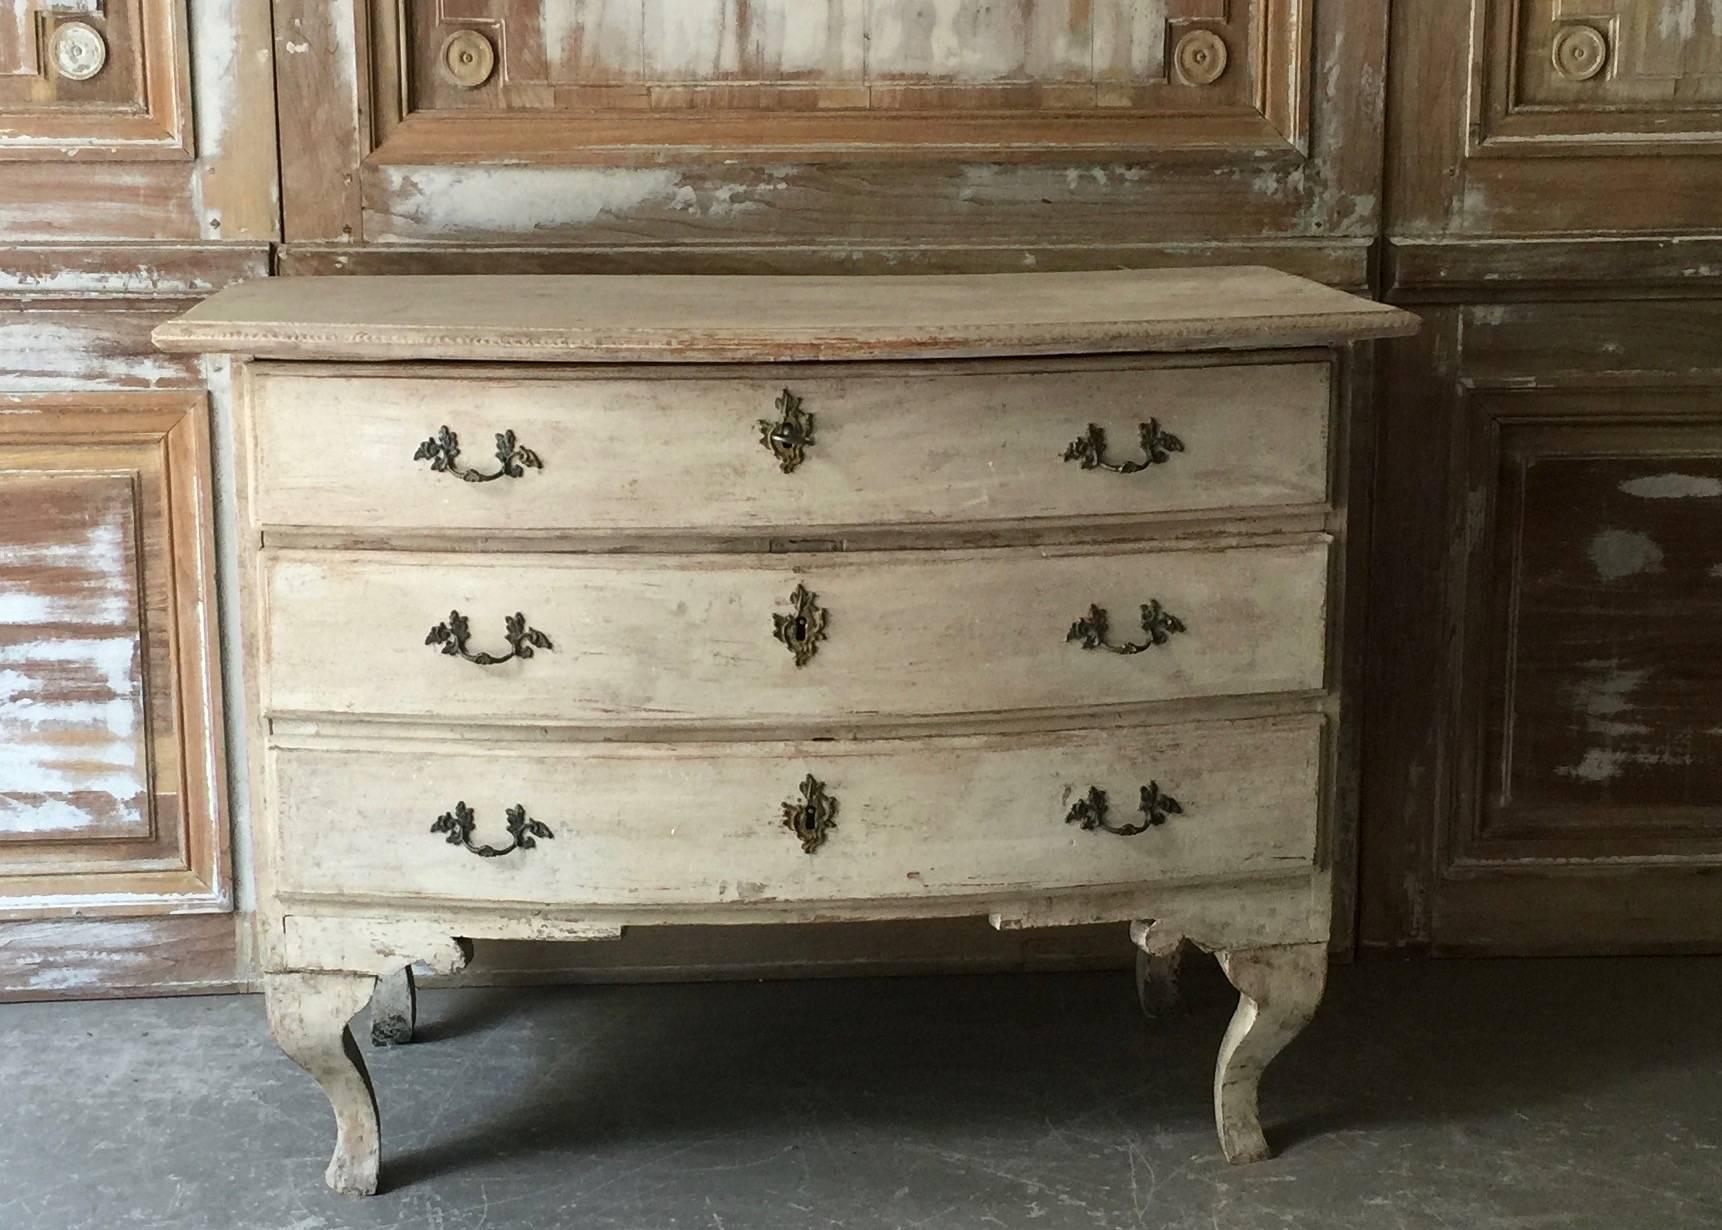 Exceptional Swedish Rococo period chest of drawers with wonderfully curvaceous serpentine drawers and beautifully carved details to the front and side skirts.
Stockholm, Sweden, circa 1760.

Here are few examples surprising pieces and objects,